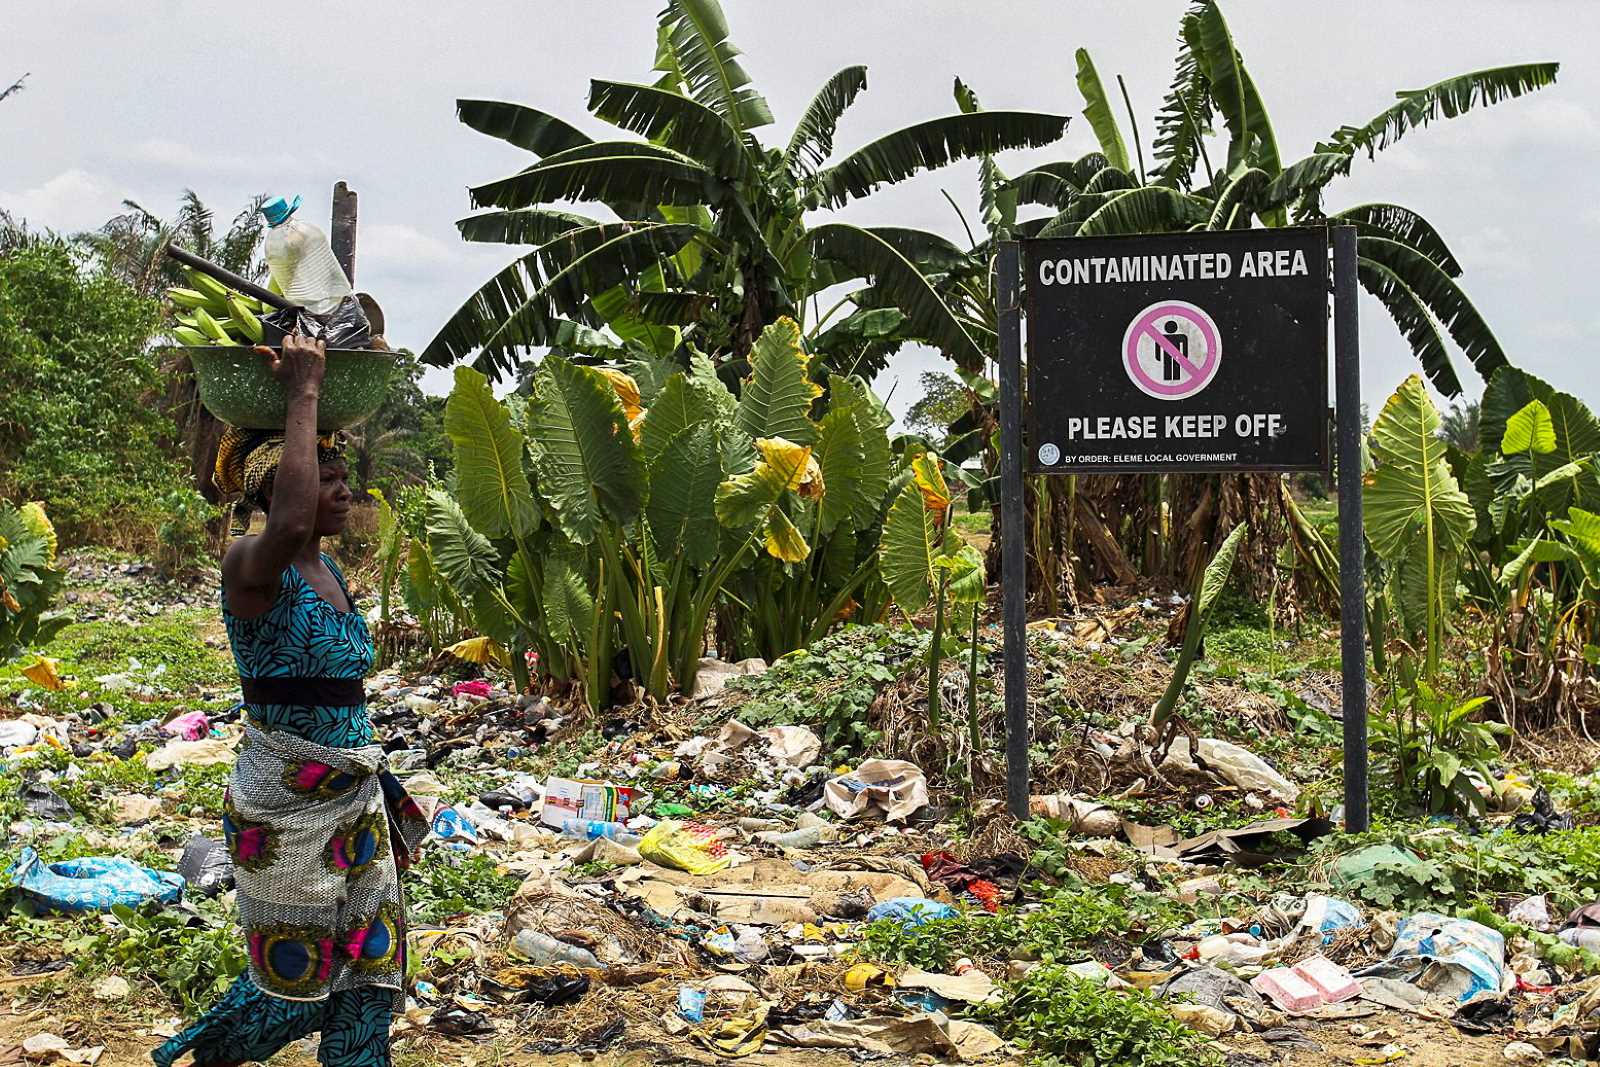 Due to oil-extraction pollution, some places are dangerously contaminated in the Niger Delta.